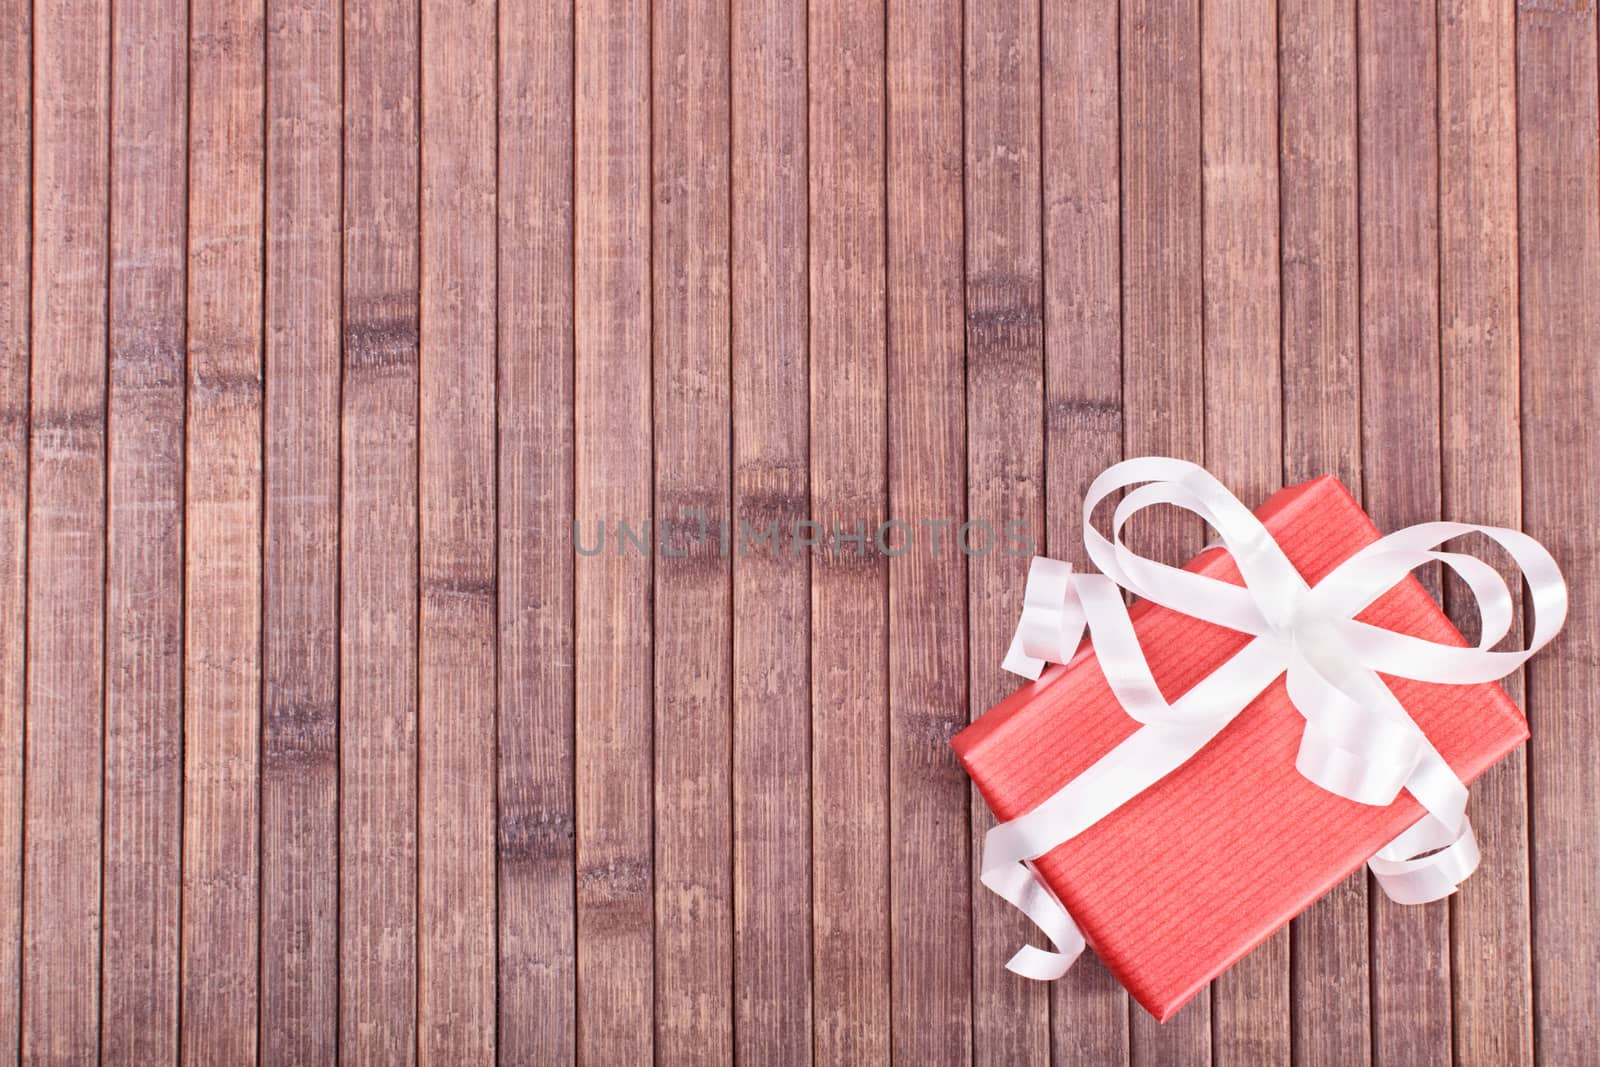 Top view of a gift box on a wooden background.